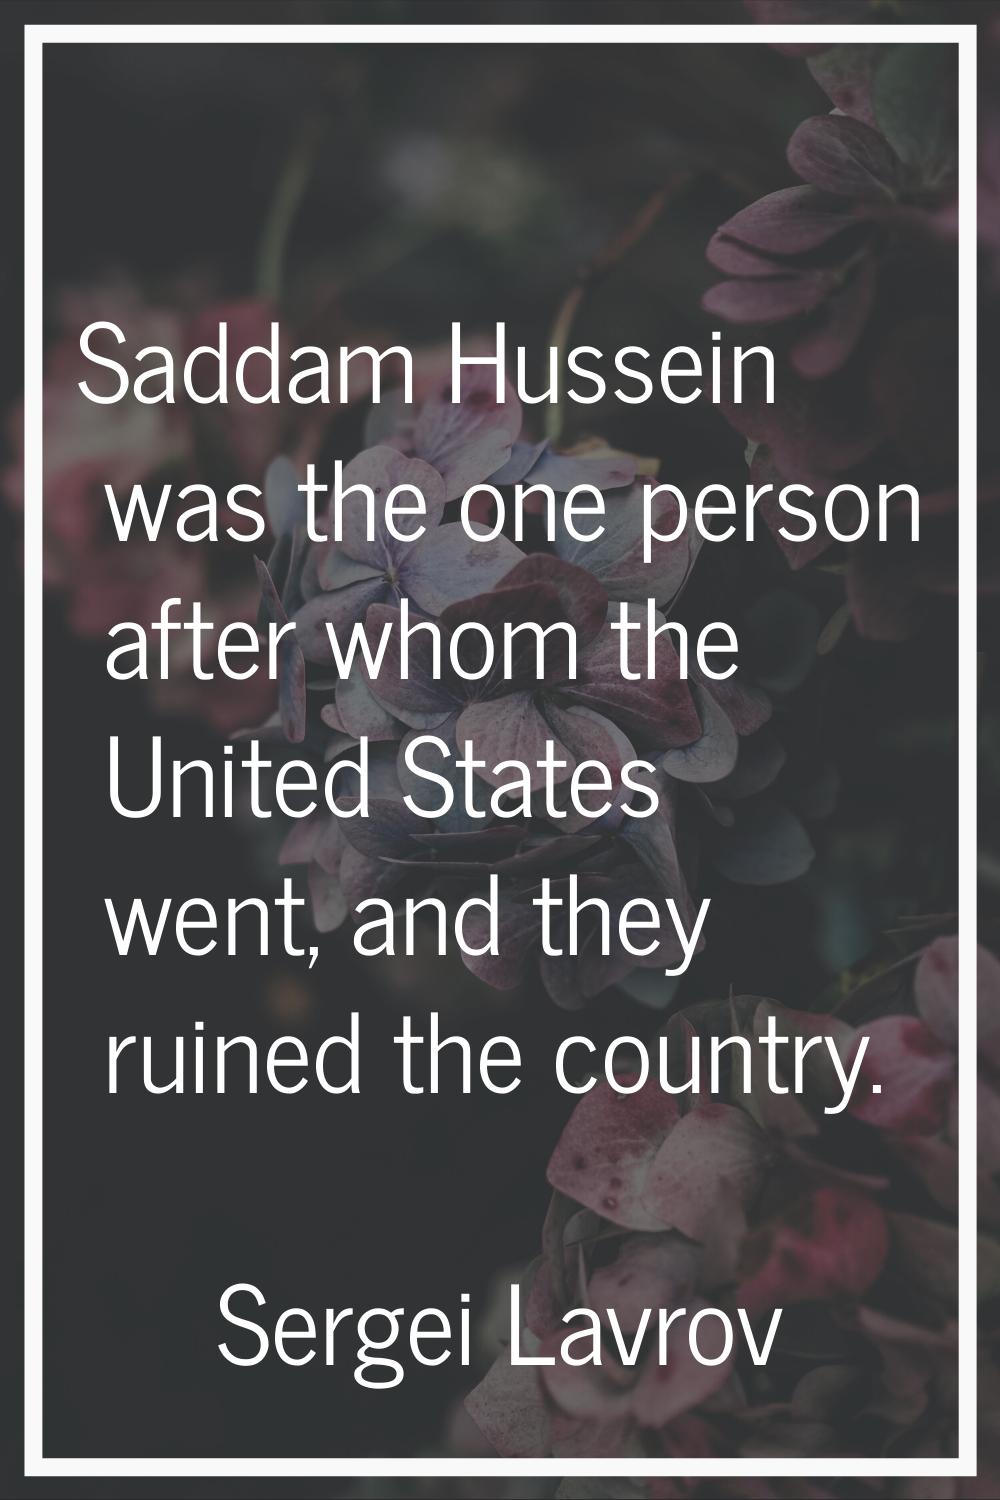 Saddam Hussein was the one person after whom the United States went, and they ruined the country.